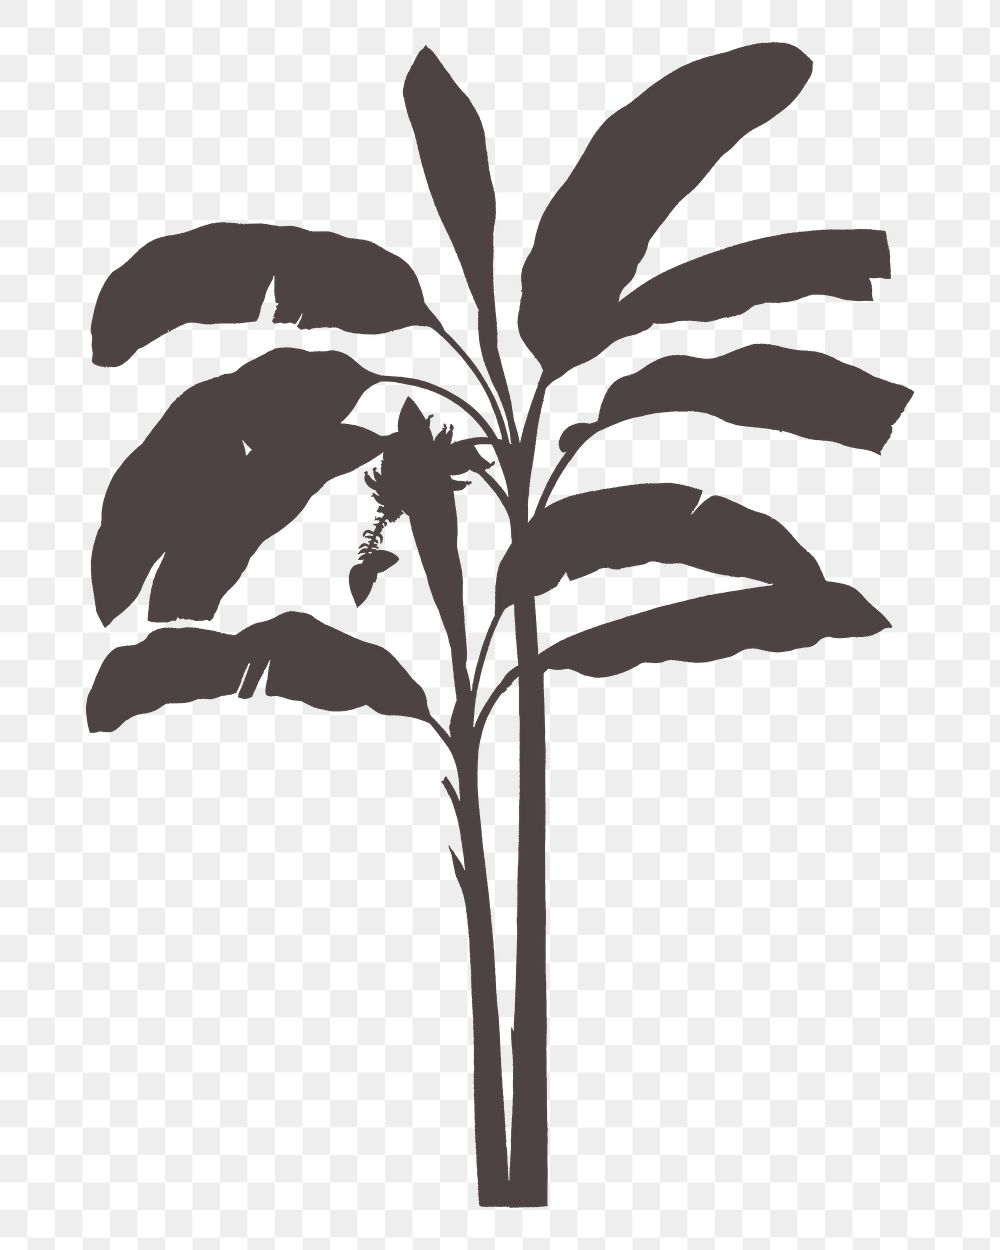 Png banana tree shadow, design element on transparent background